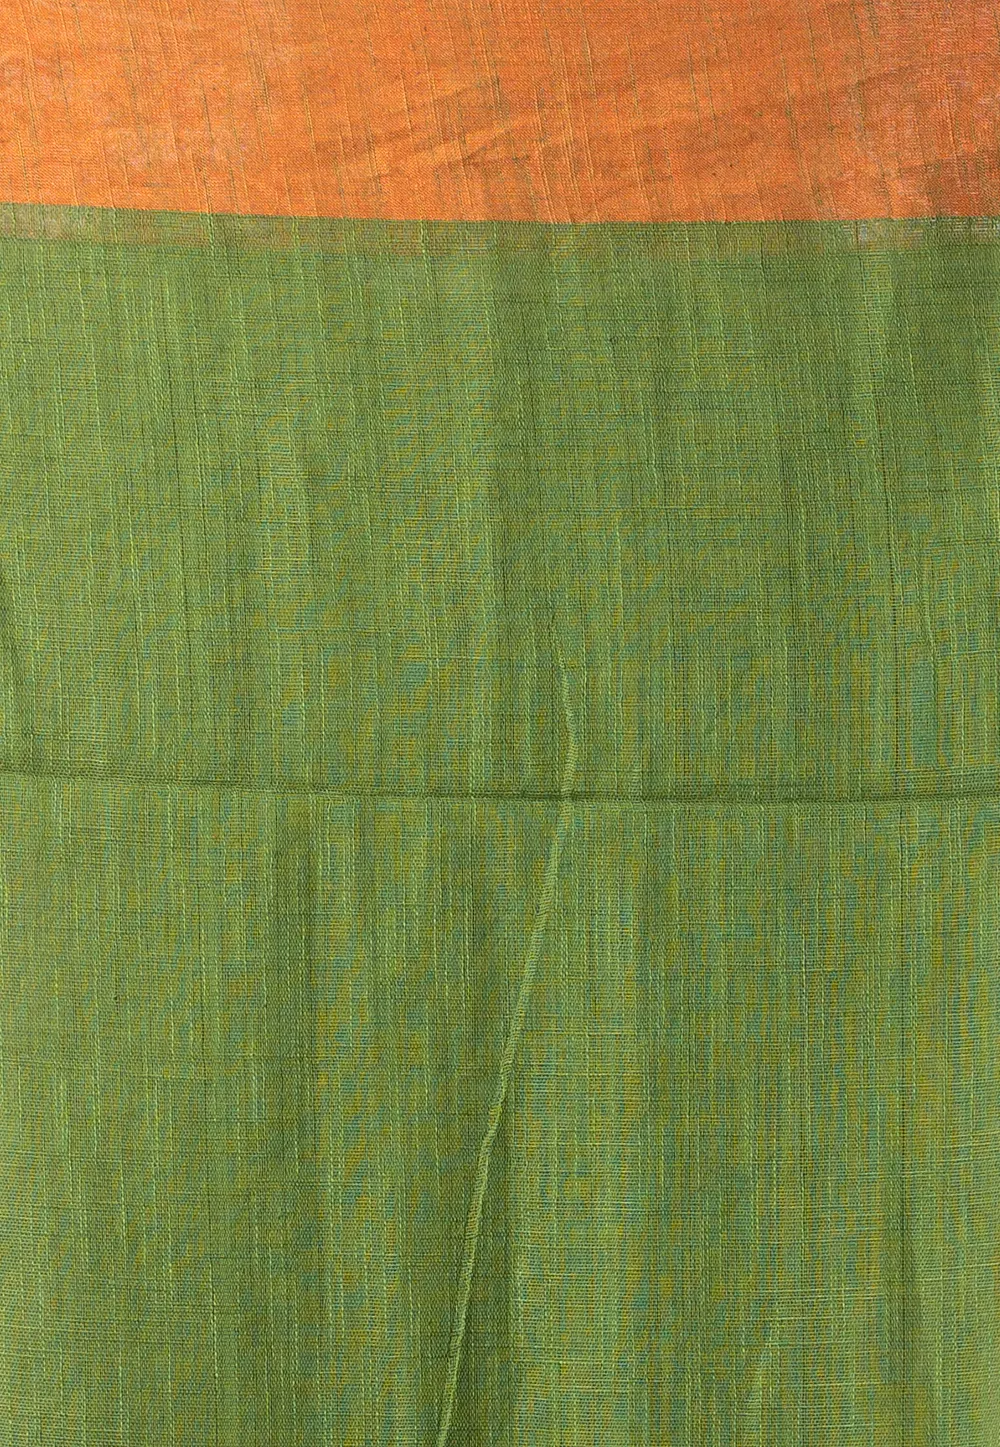 forest green handloom saree with multicolor pyramid motifs 60265431521bd 1613124657